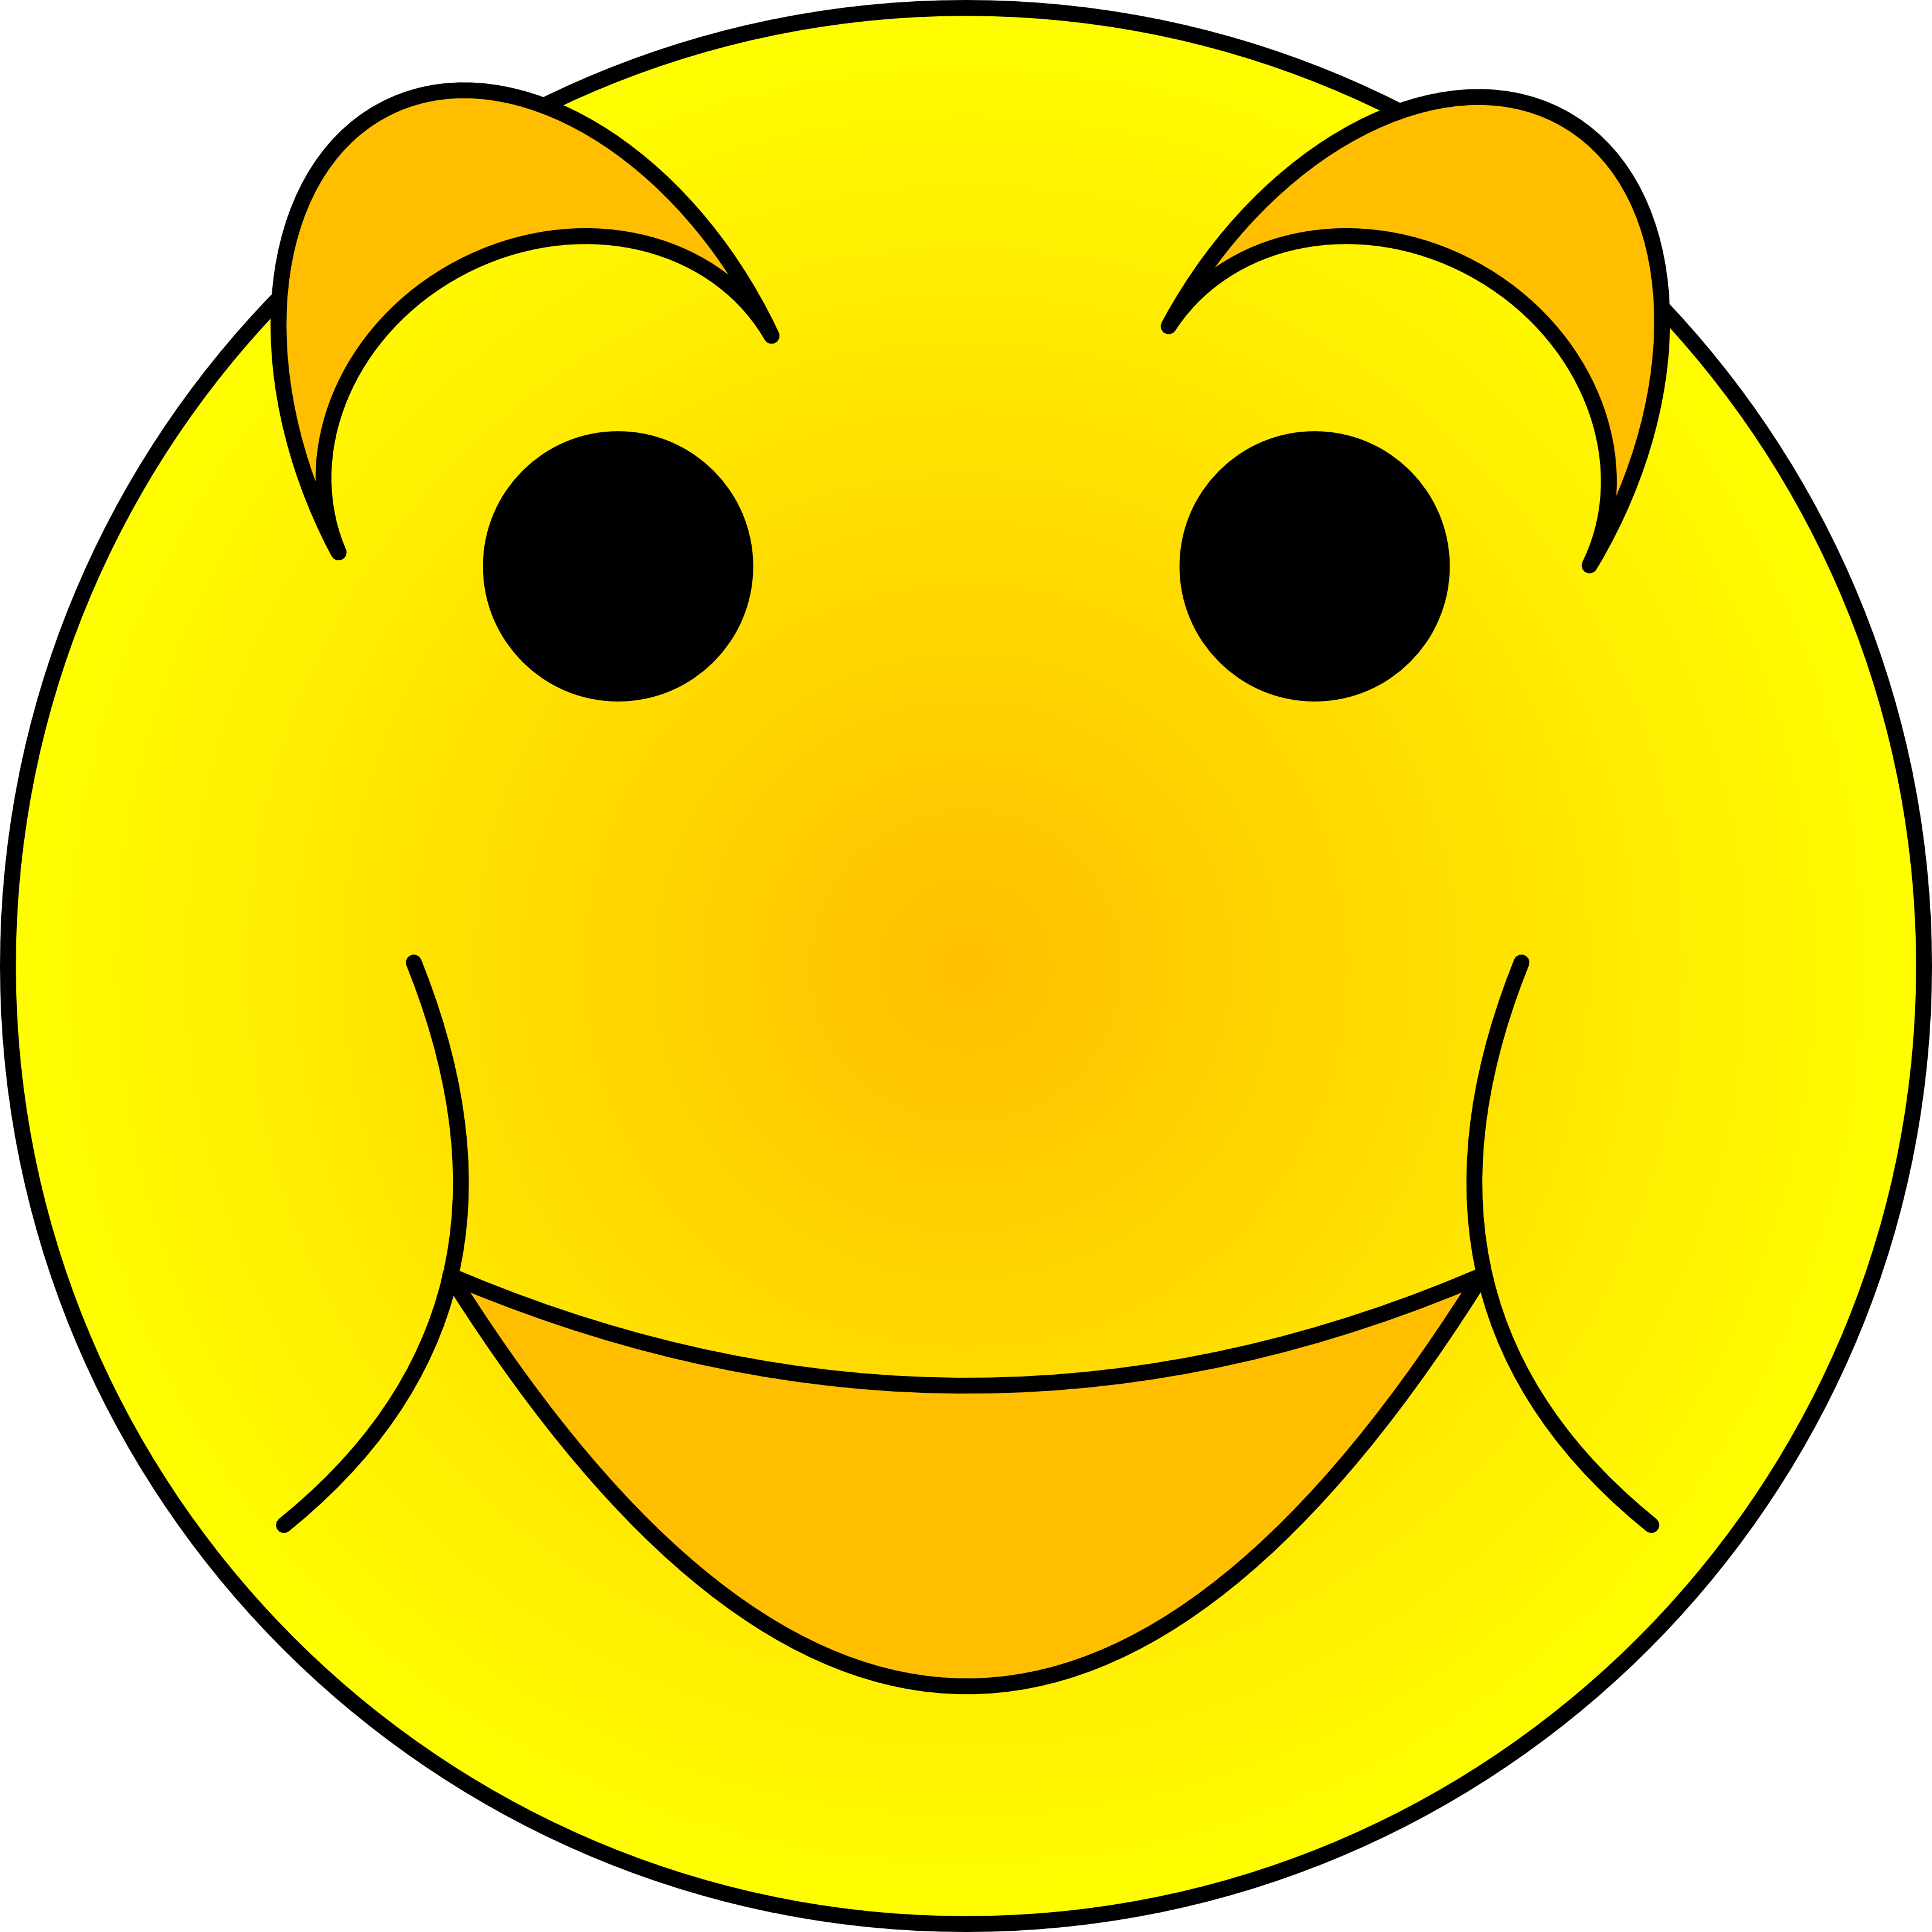 Free Excited Smiley - Worried Smiley Face (3200x3200)